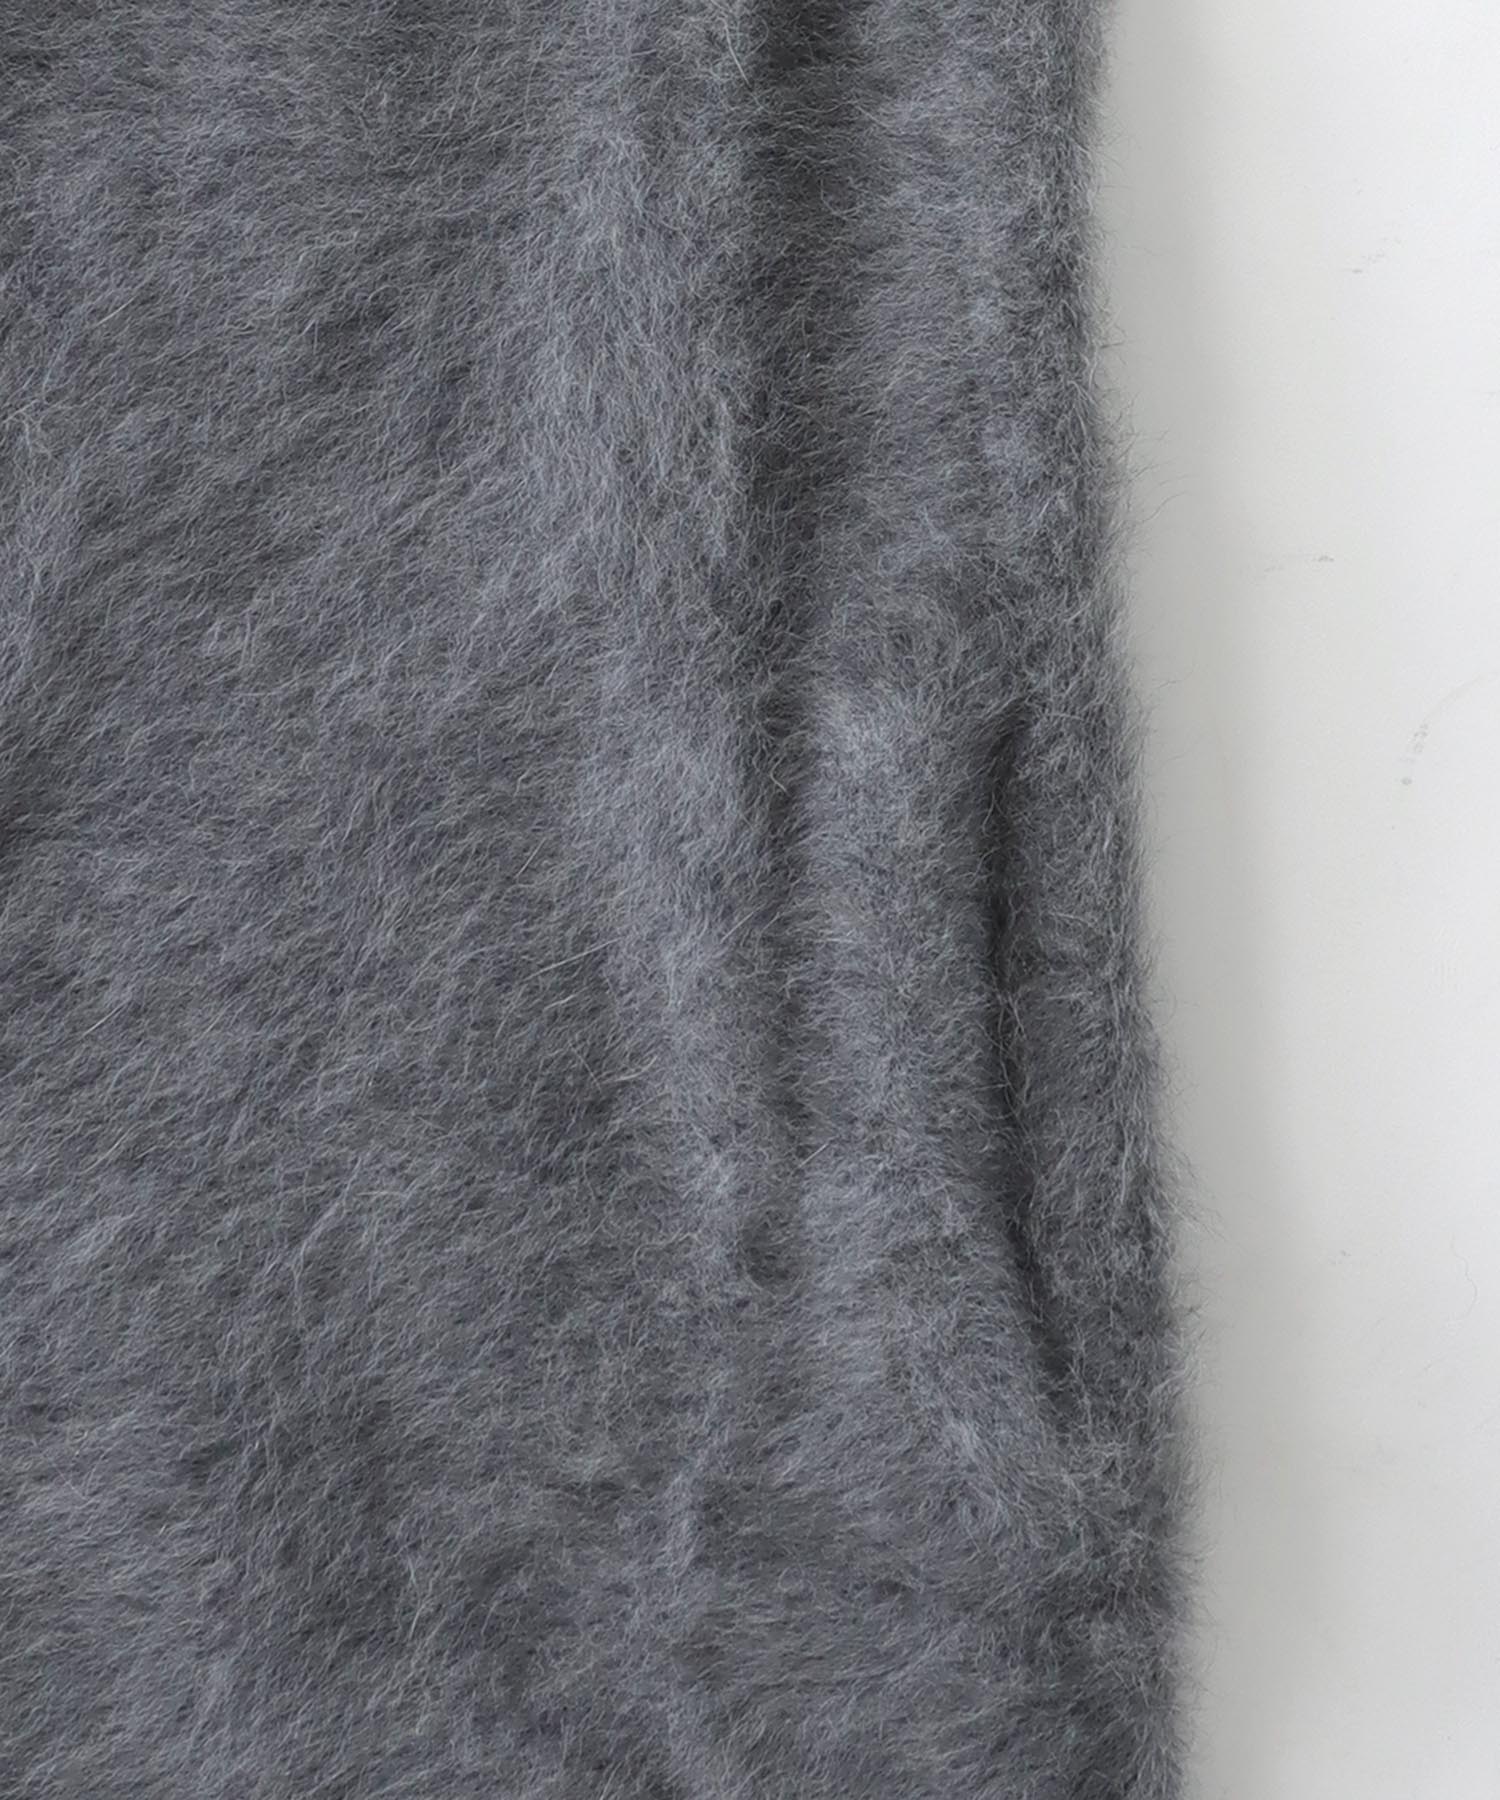 fox cashmere gillet | AND ON JIONE STORE（アンドオン）ジオン商事